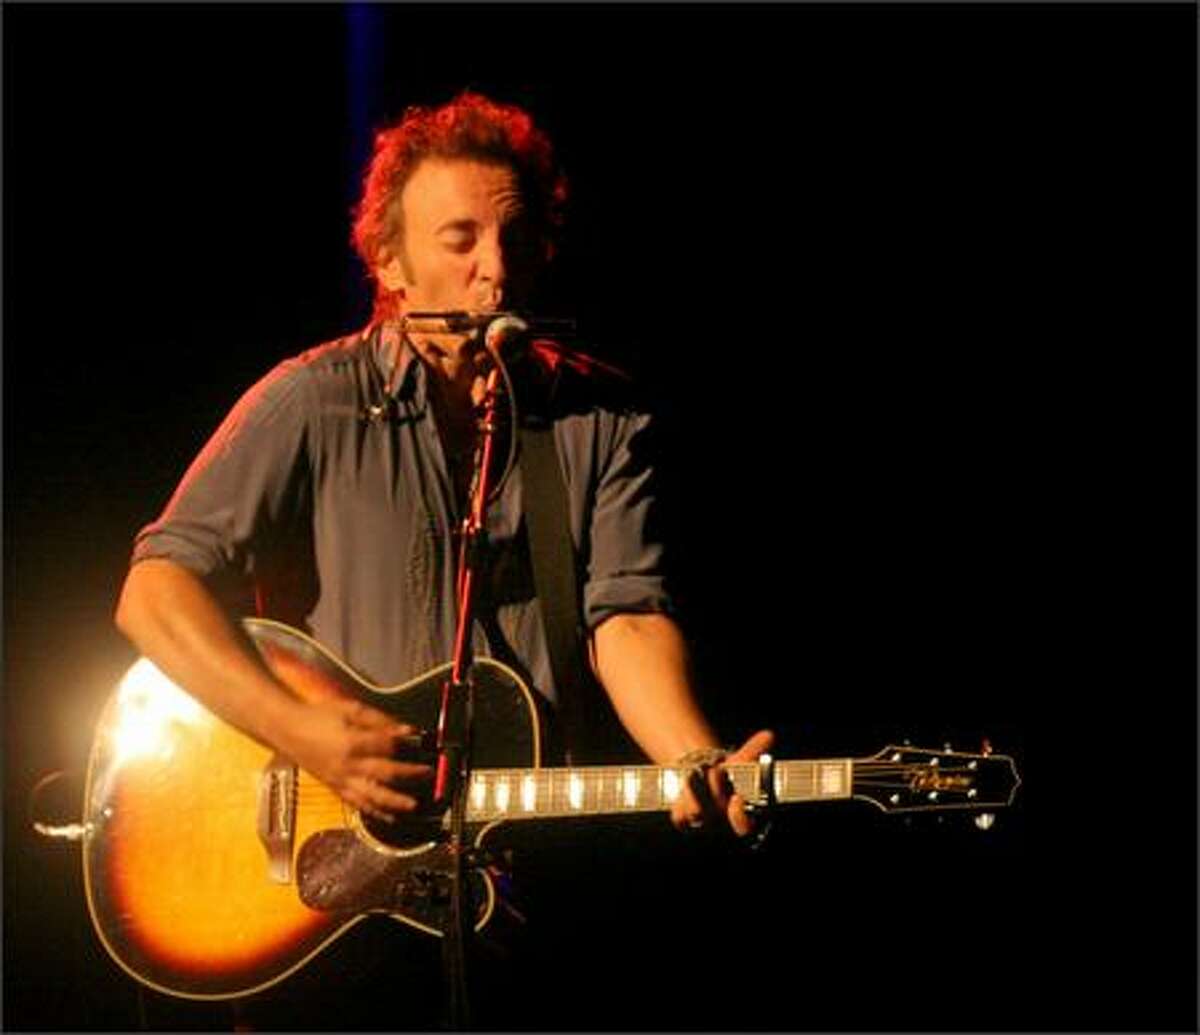 Bruce Springsteen performs the song "Devils & Dust" during his Devils & Dust concert at KeyArena Thursday night.